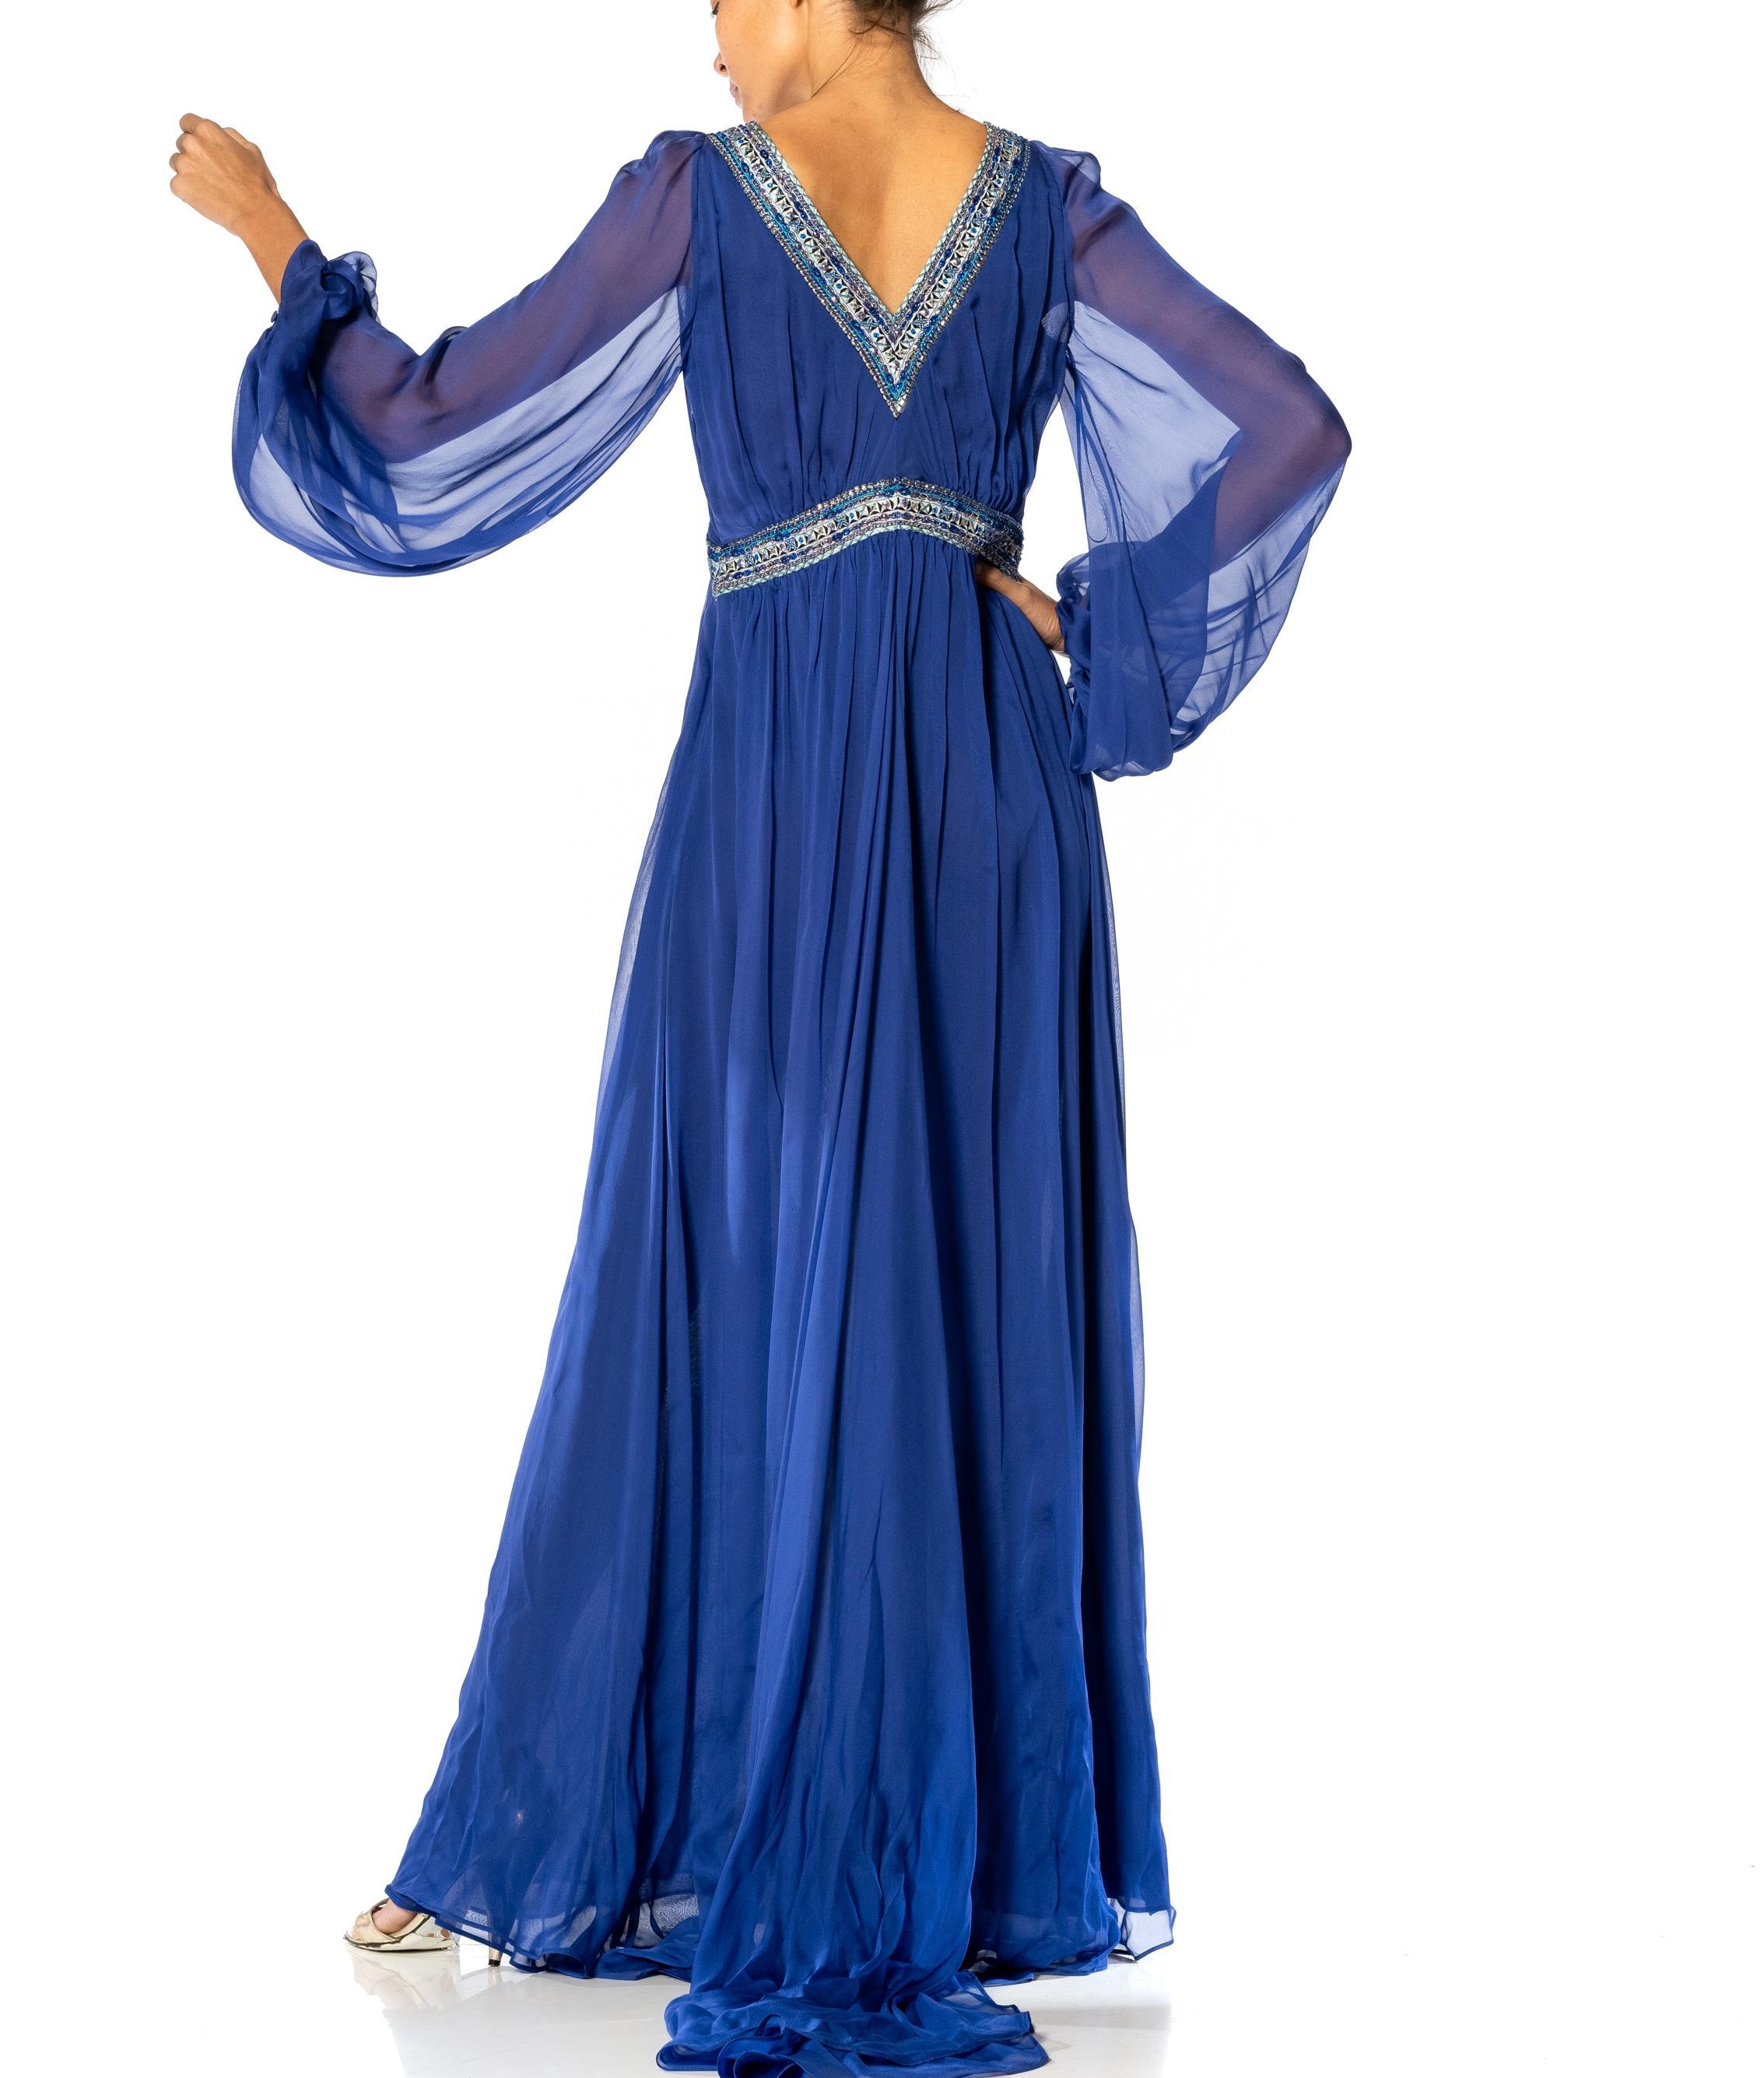 2000S EMILIO PUCCI Cobalt Blue Silk Chiffon Sleeved Gown With Beaded Print Deta For Sale 7